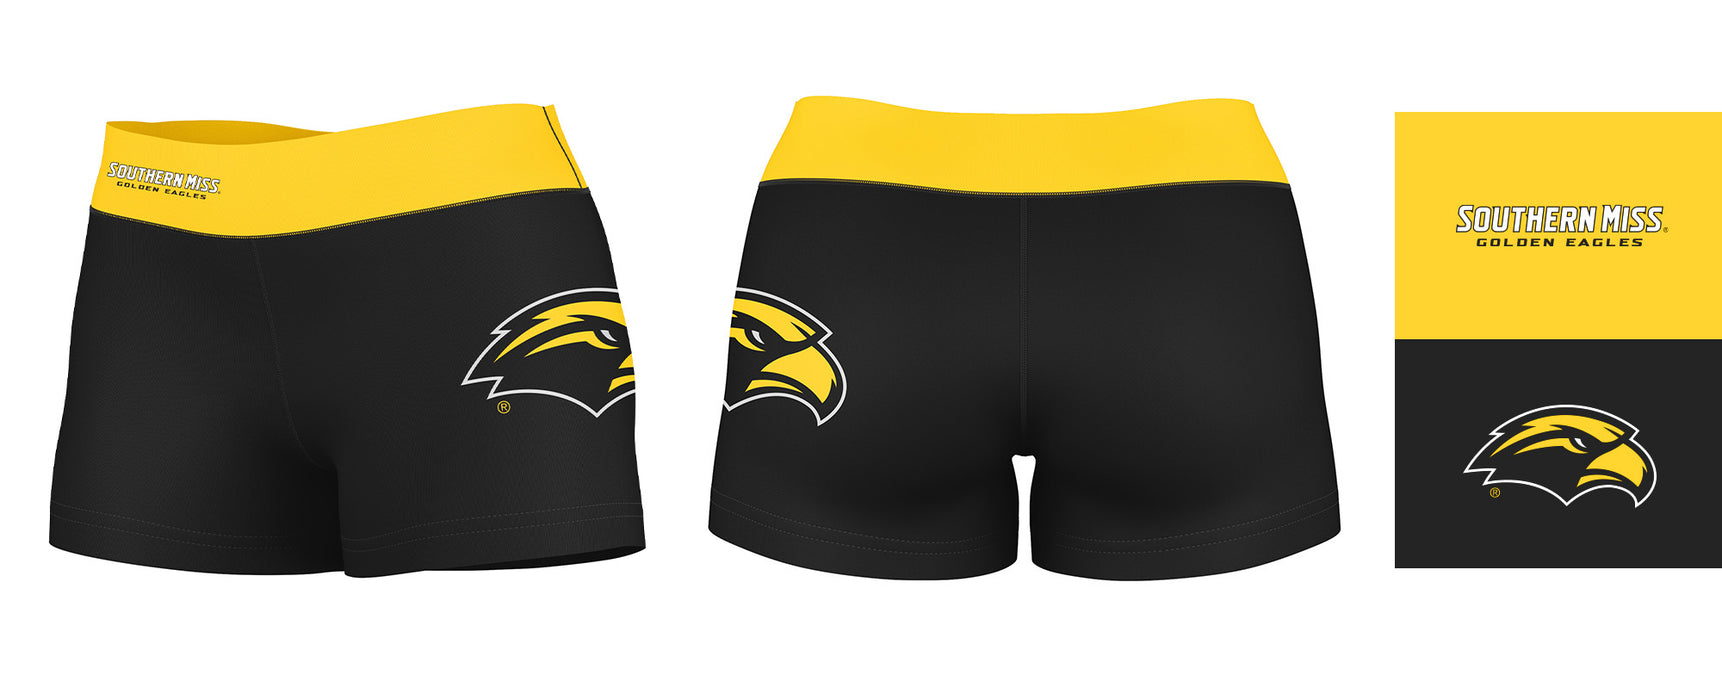 Southern Miss Golden Eagles Logo on Thigh & Waistband Black & Gold Women Yoga Booty Workout Shorts 3.75 Inseam" - Vive La Fête - Online Apparel Store